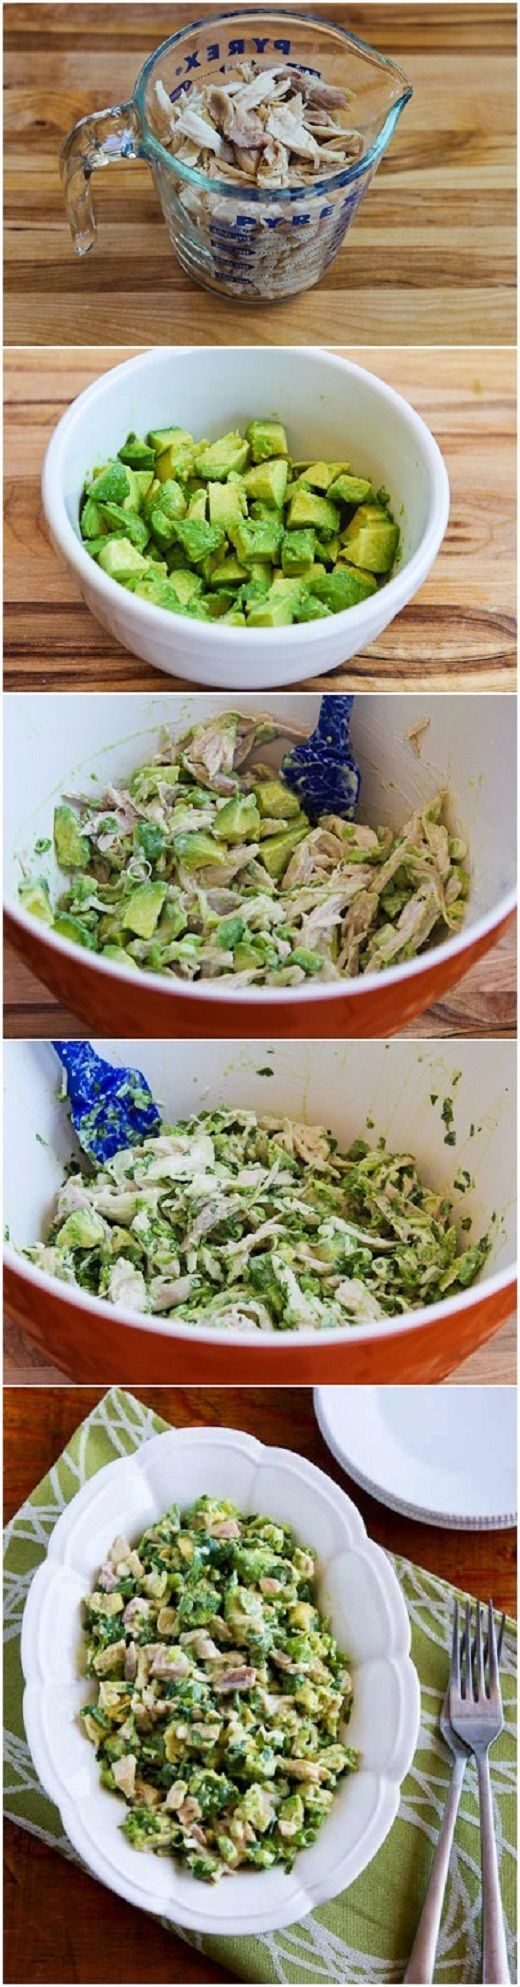 Chicken and Avocado Salad with Lime and Cilantro Recipe. Sub Greek yogurt instead of mayo and this works for the 21 Day Fix!